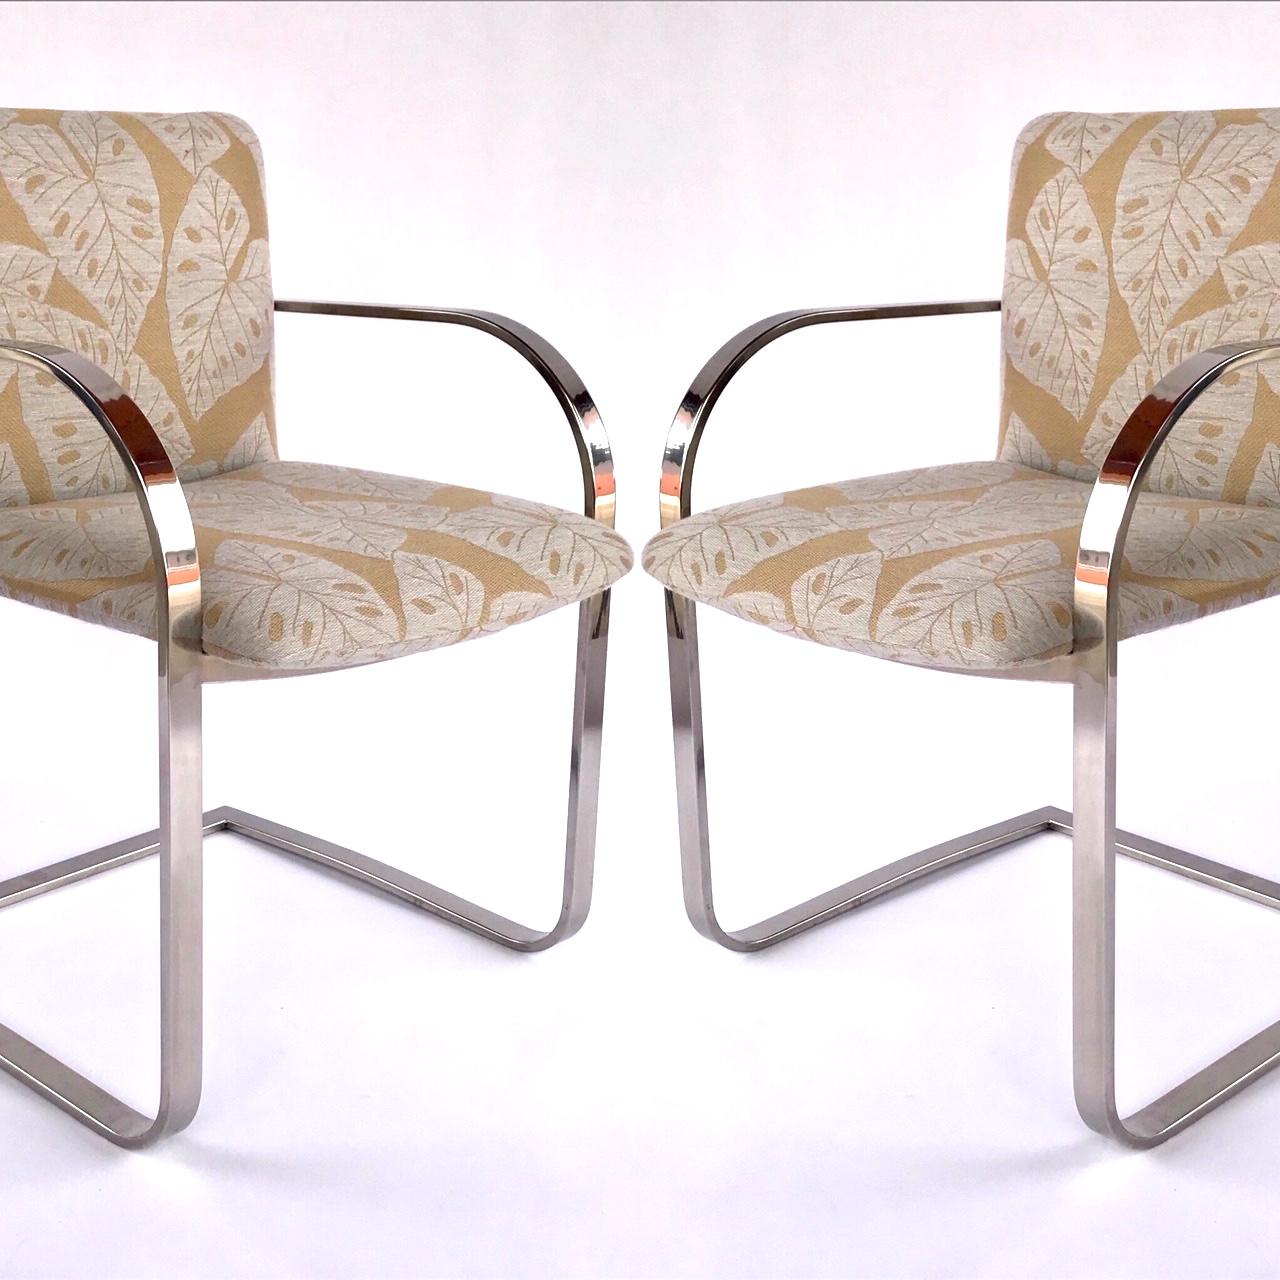 Mid-Century Modern desk chairs or side chairs with cantilevered steel frames in chrome. Chairs have streamlined profile with curved armrests and floating seat design. Newly upholstered in bold handwoven fabric with tropical leaf print in